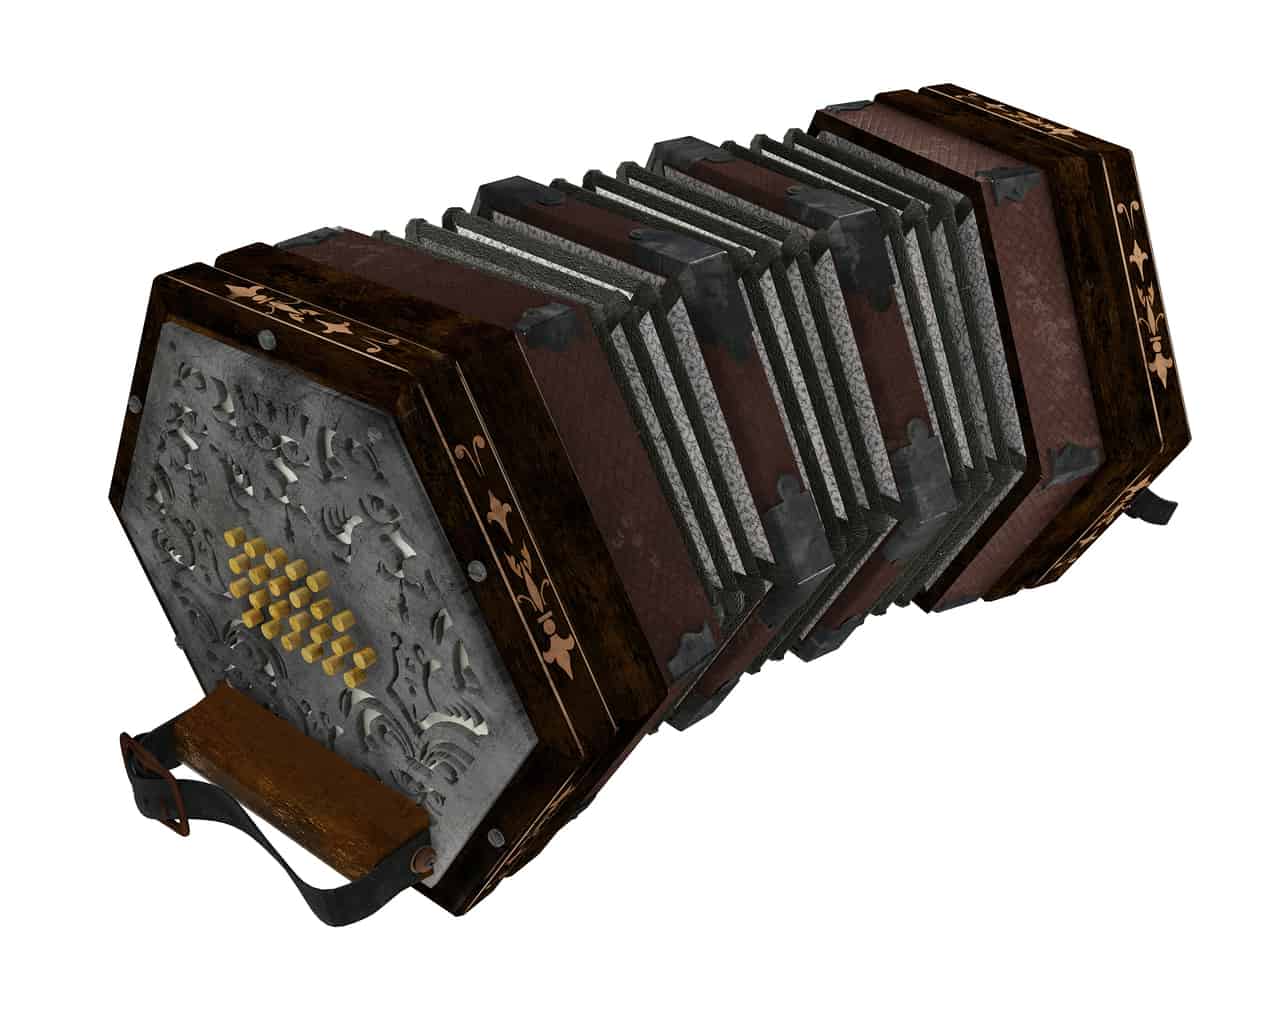 concertina isolated at the white background.Music instrument